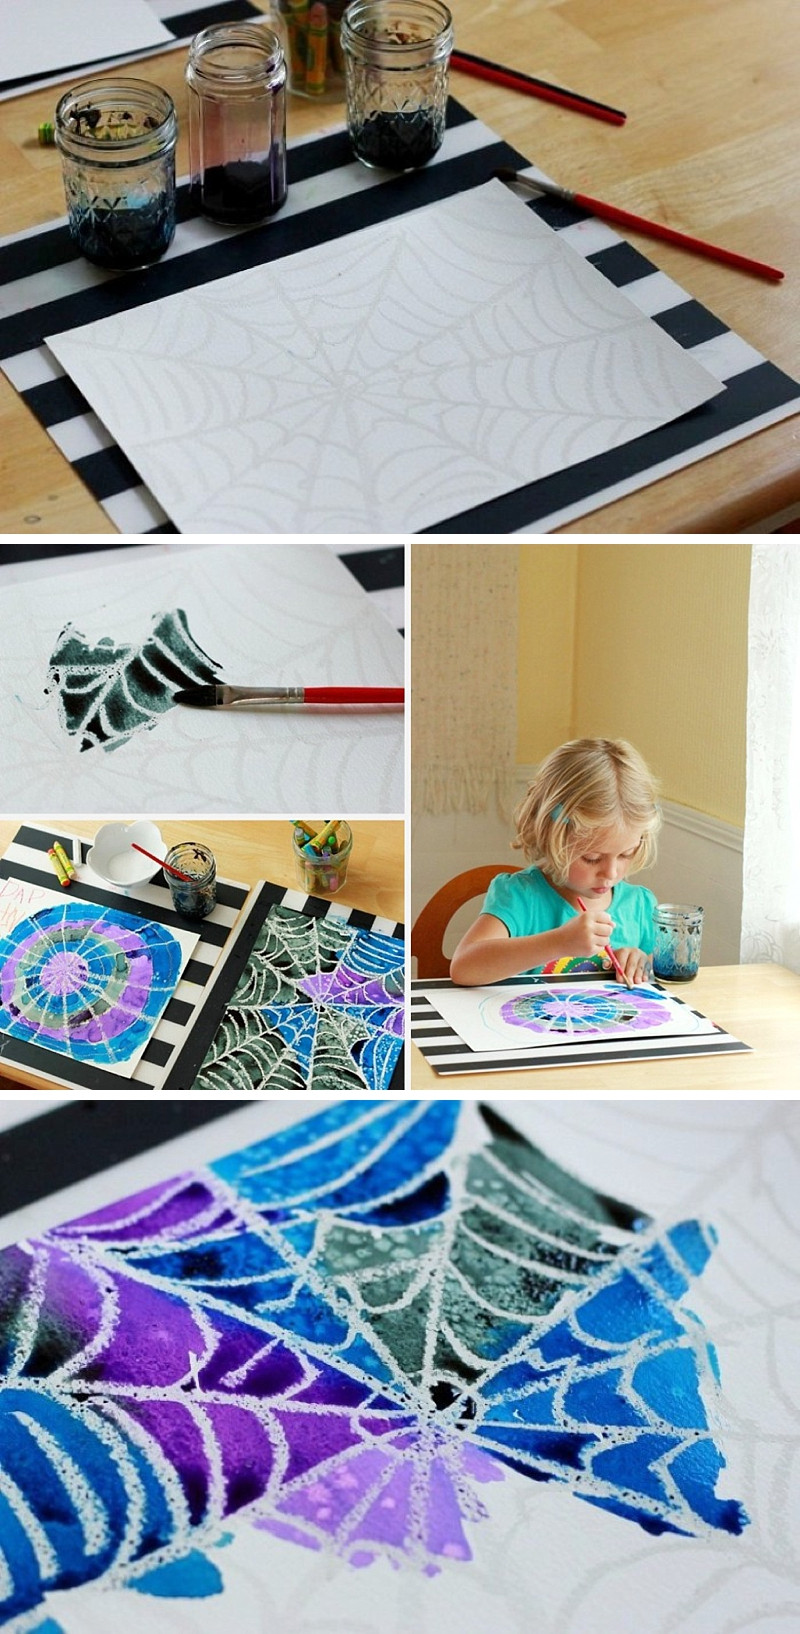 Art Project Ideas For Kids
 Spider Web Art Project A Simple and Beautiful